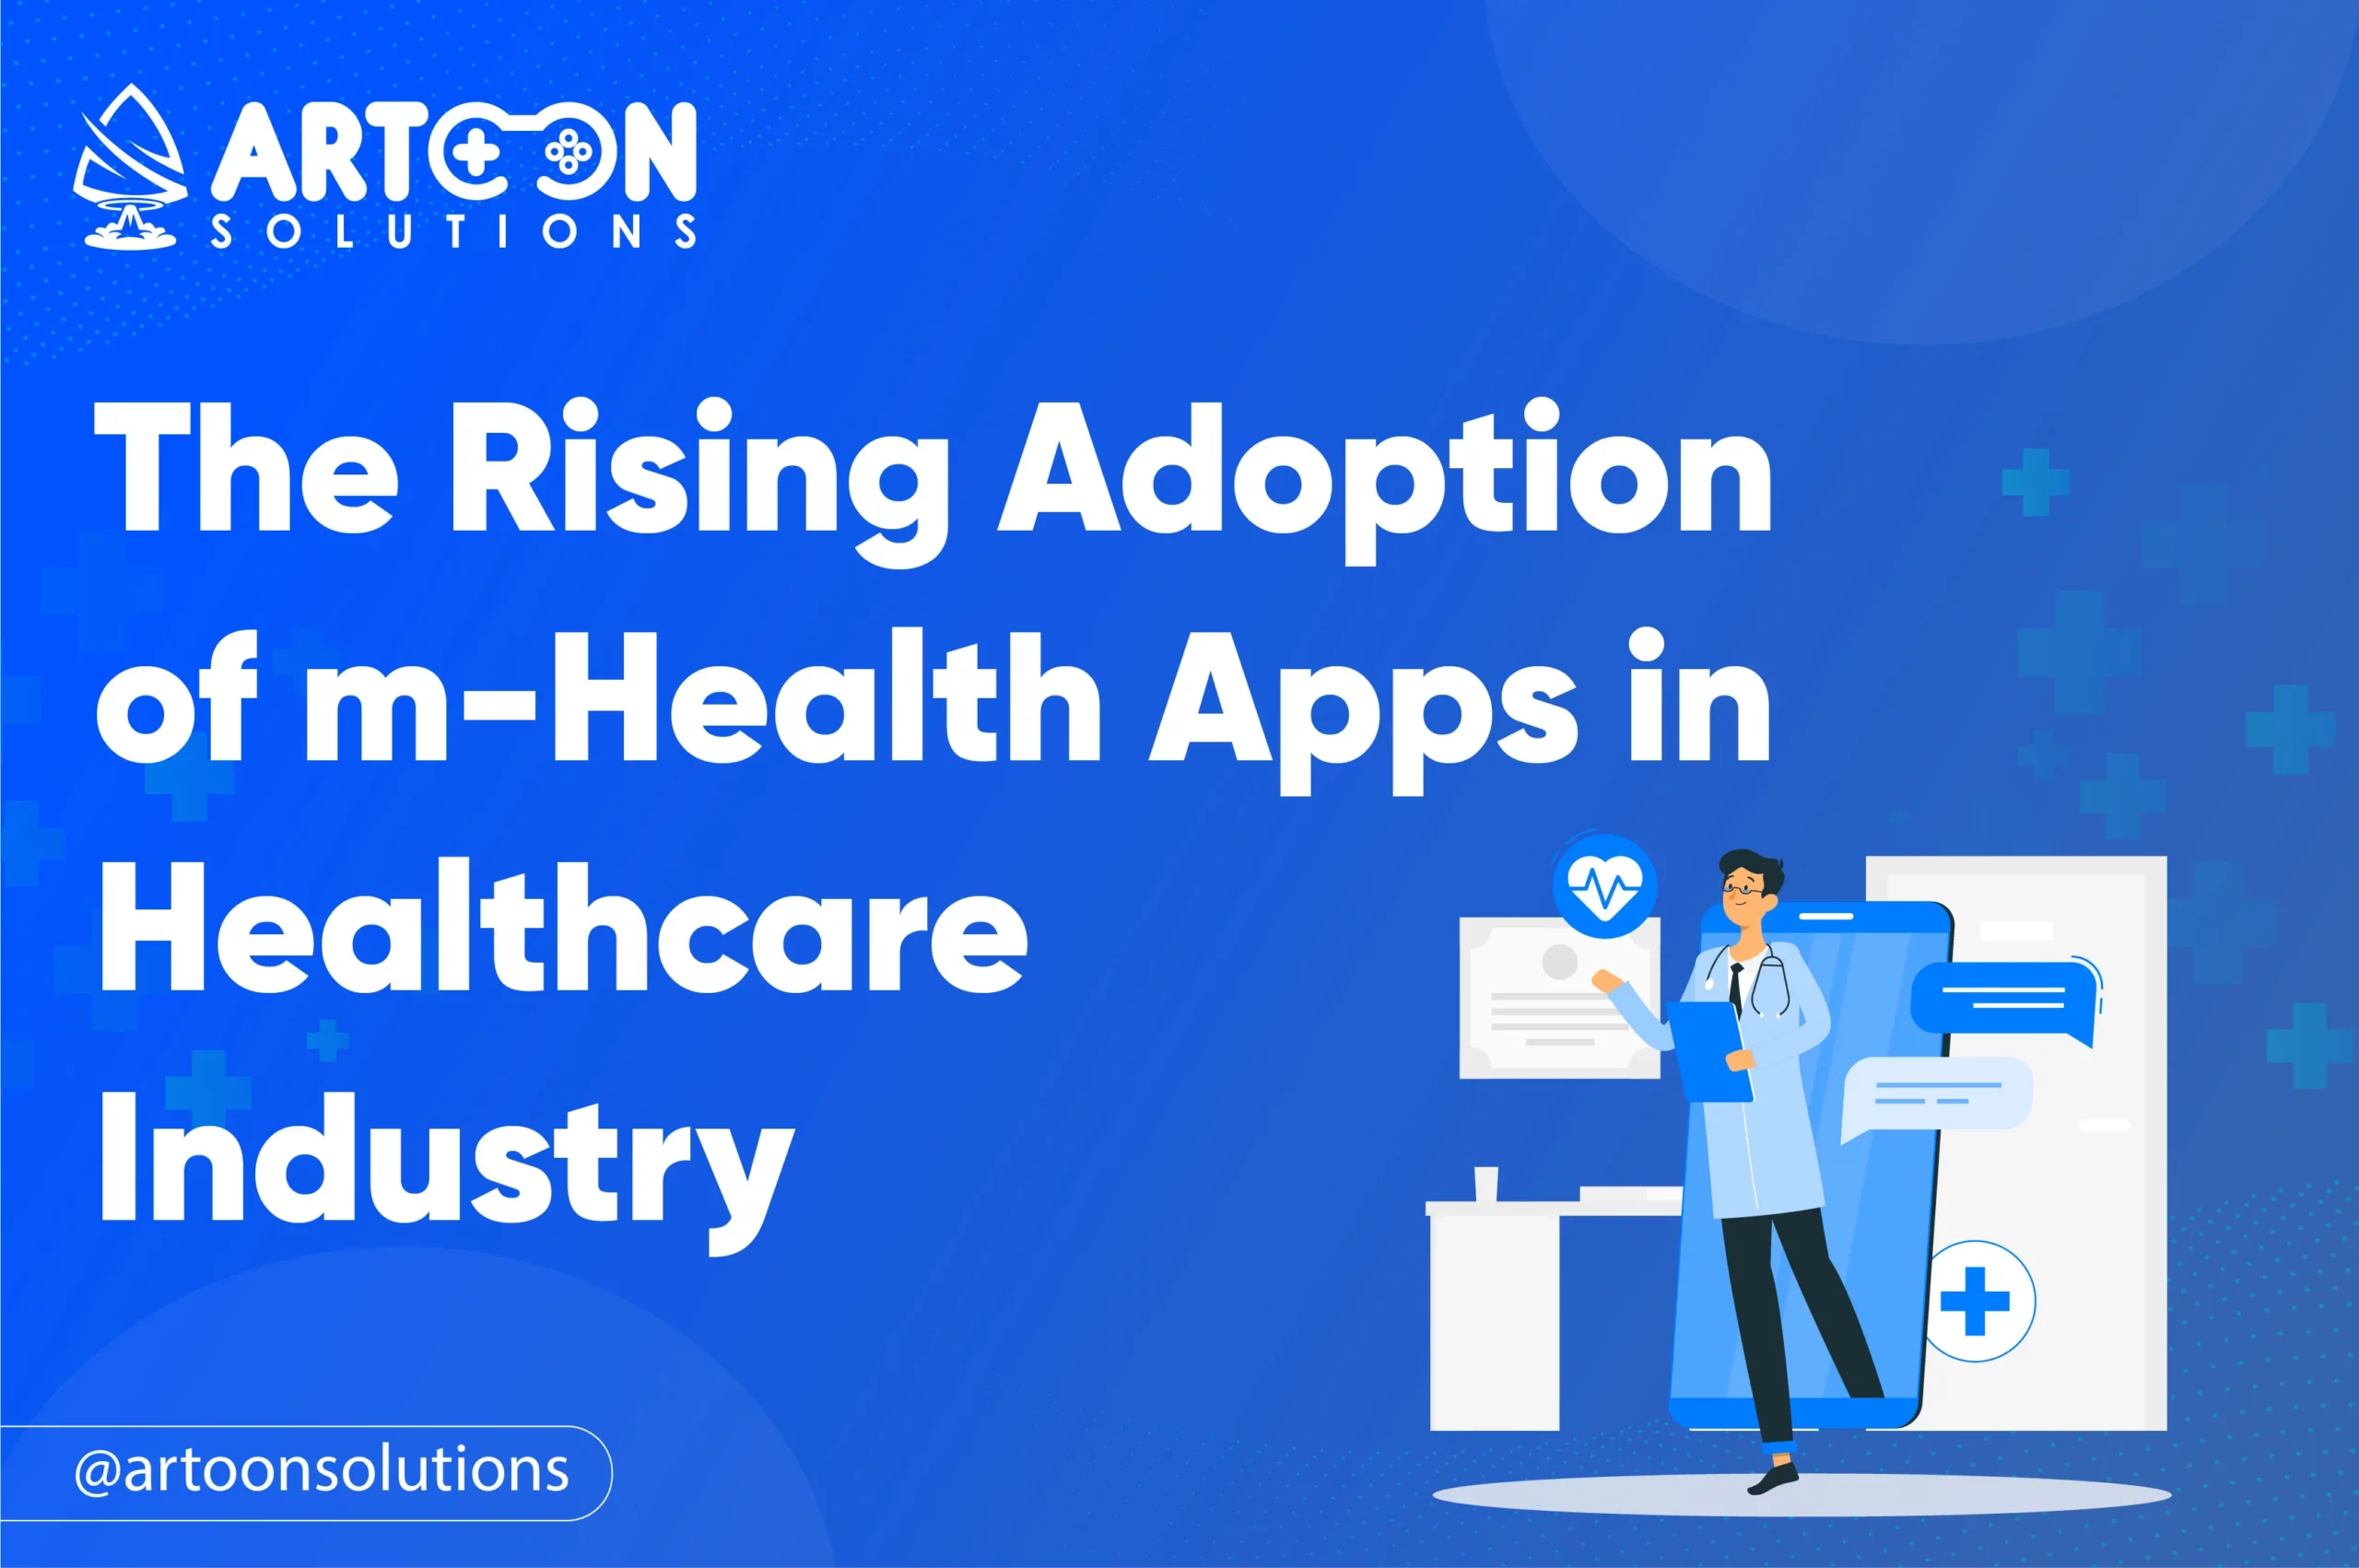 mHealth Apps in healthcare industry